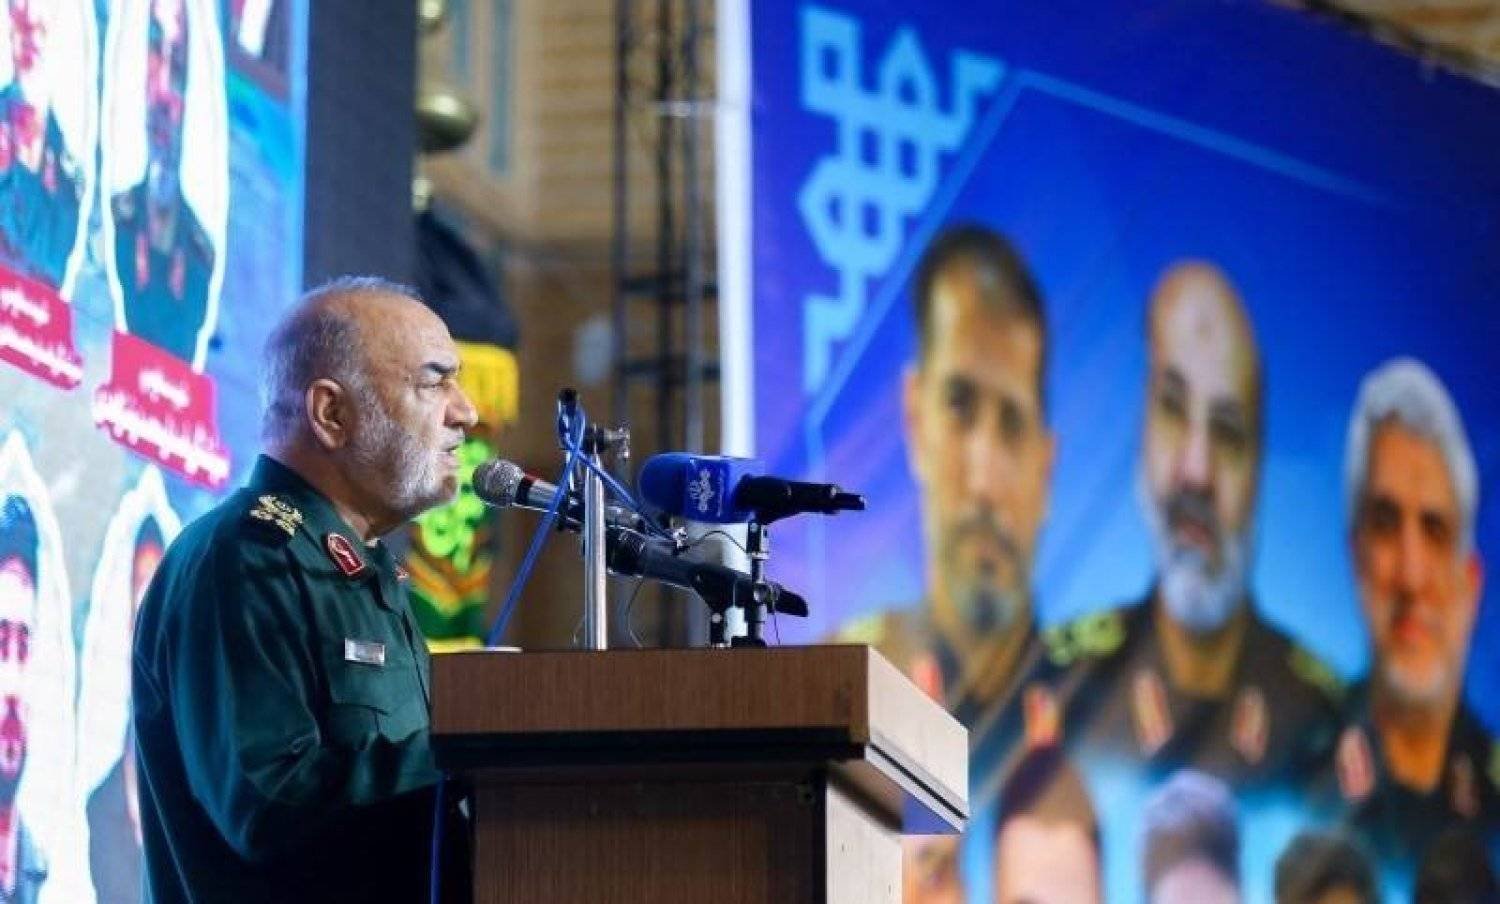 IRGC leader Gen. Hossein Salami speaks during a ceremony honoring General Mohammad Reza Zahedi, who was killed in an Israeli airstrike on the Iranian consulate in Damascus last month. (Tasnim) 